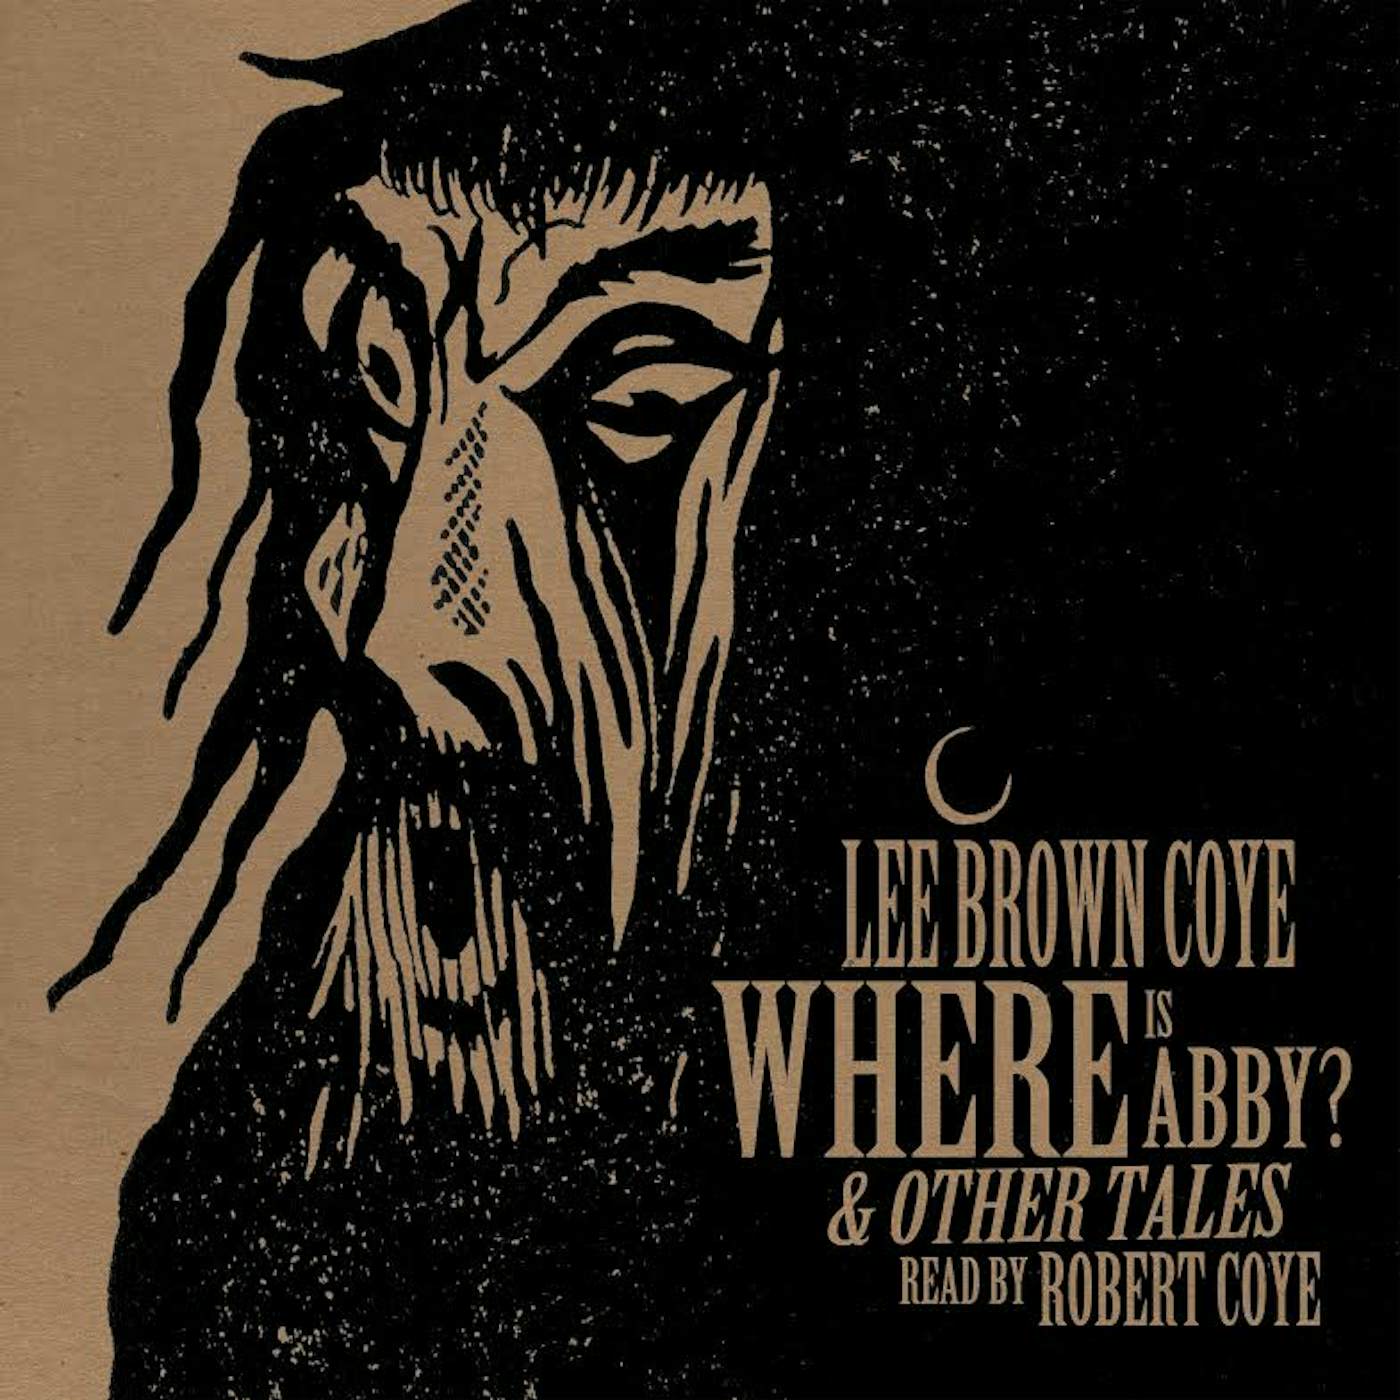 Lee Brown Coye Where Is Abby? & Other Tales Vinyl Record